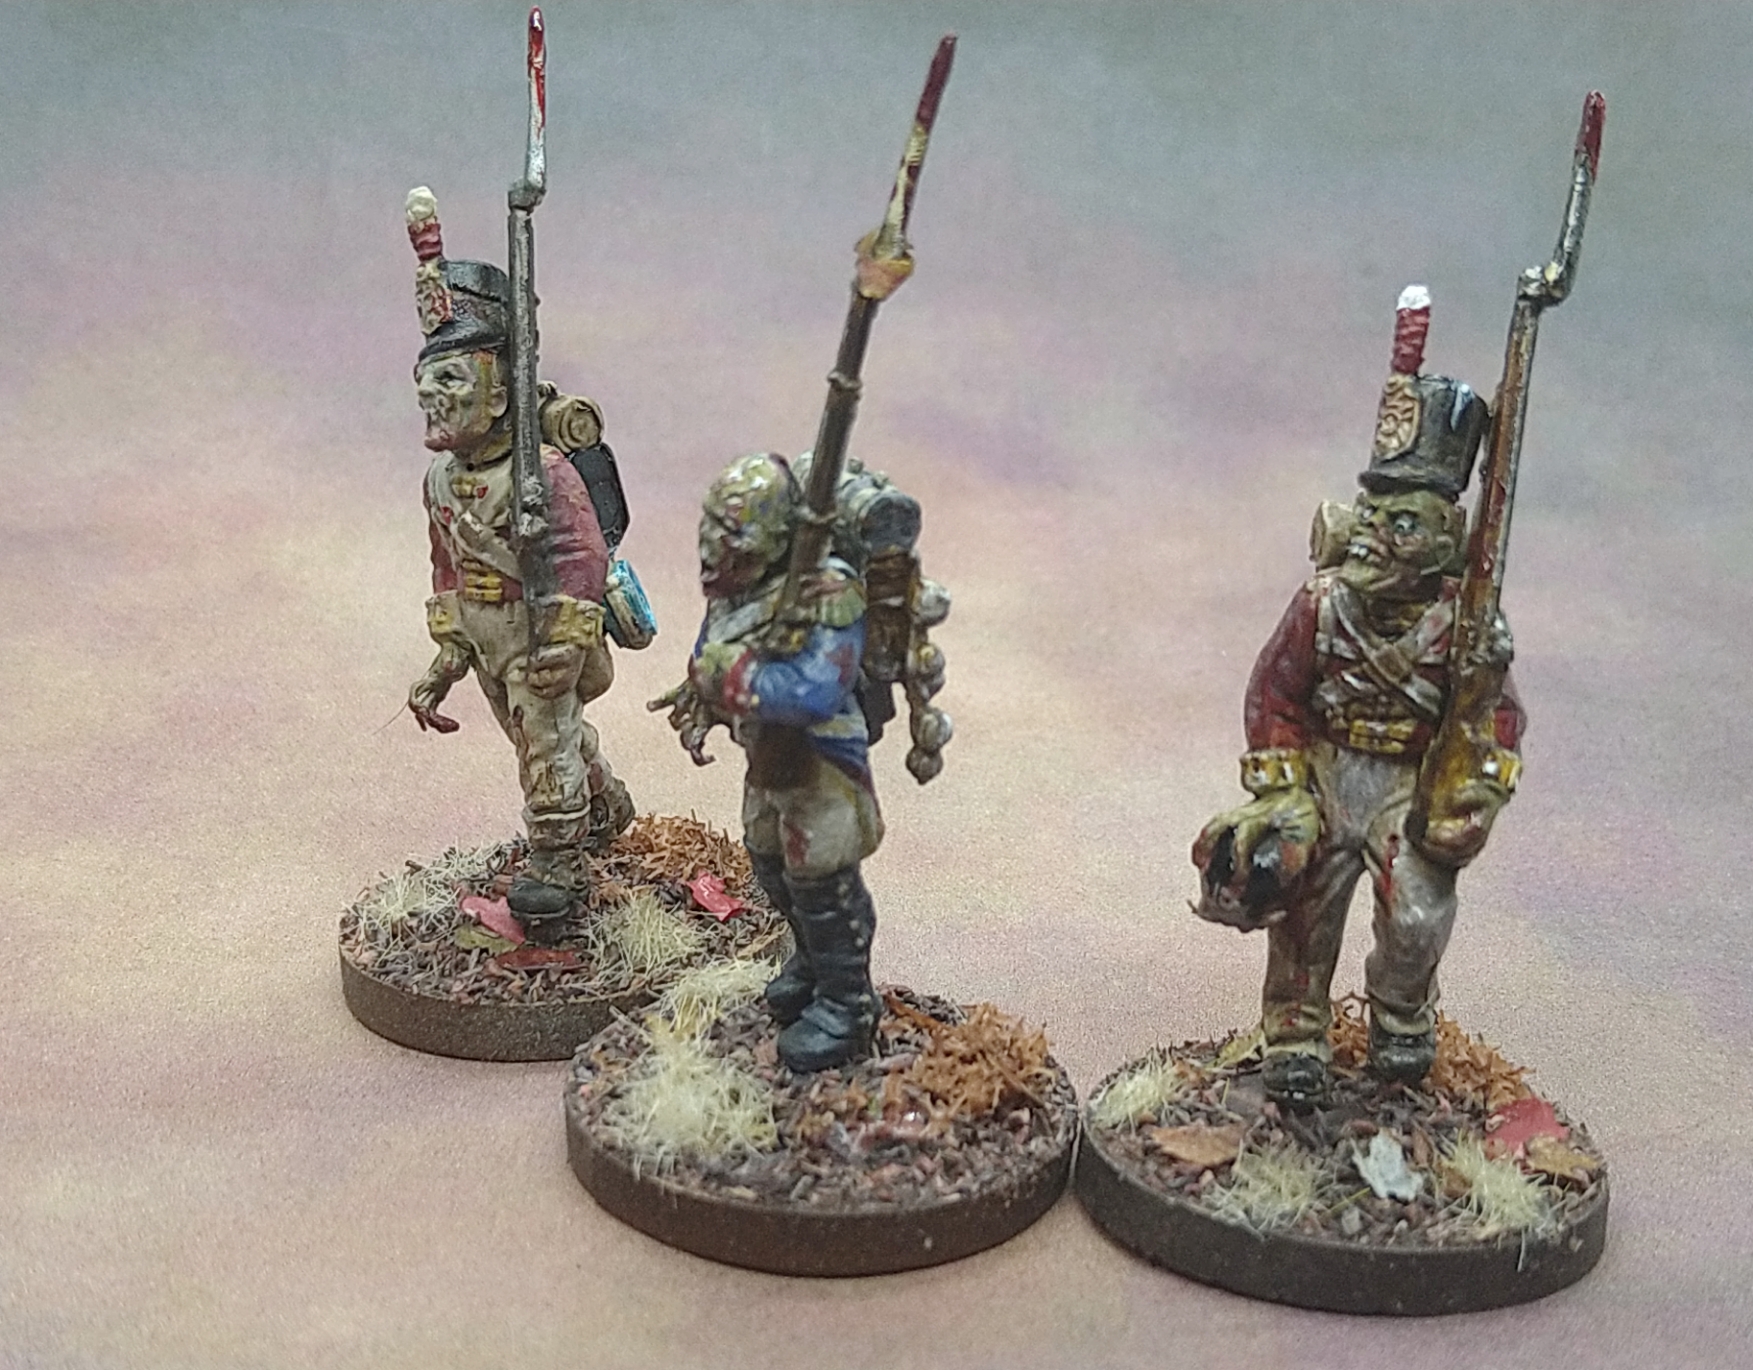 Elite Previews For Perry Miniatures' Grand Duchy Of Warsaw